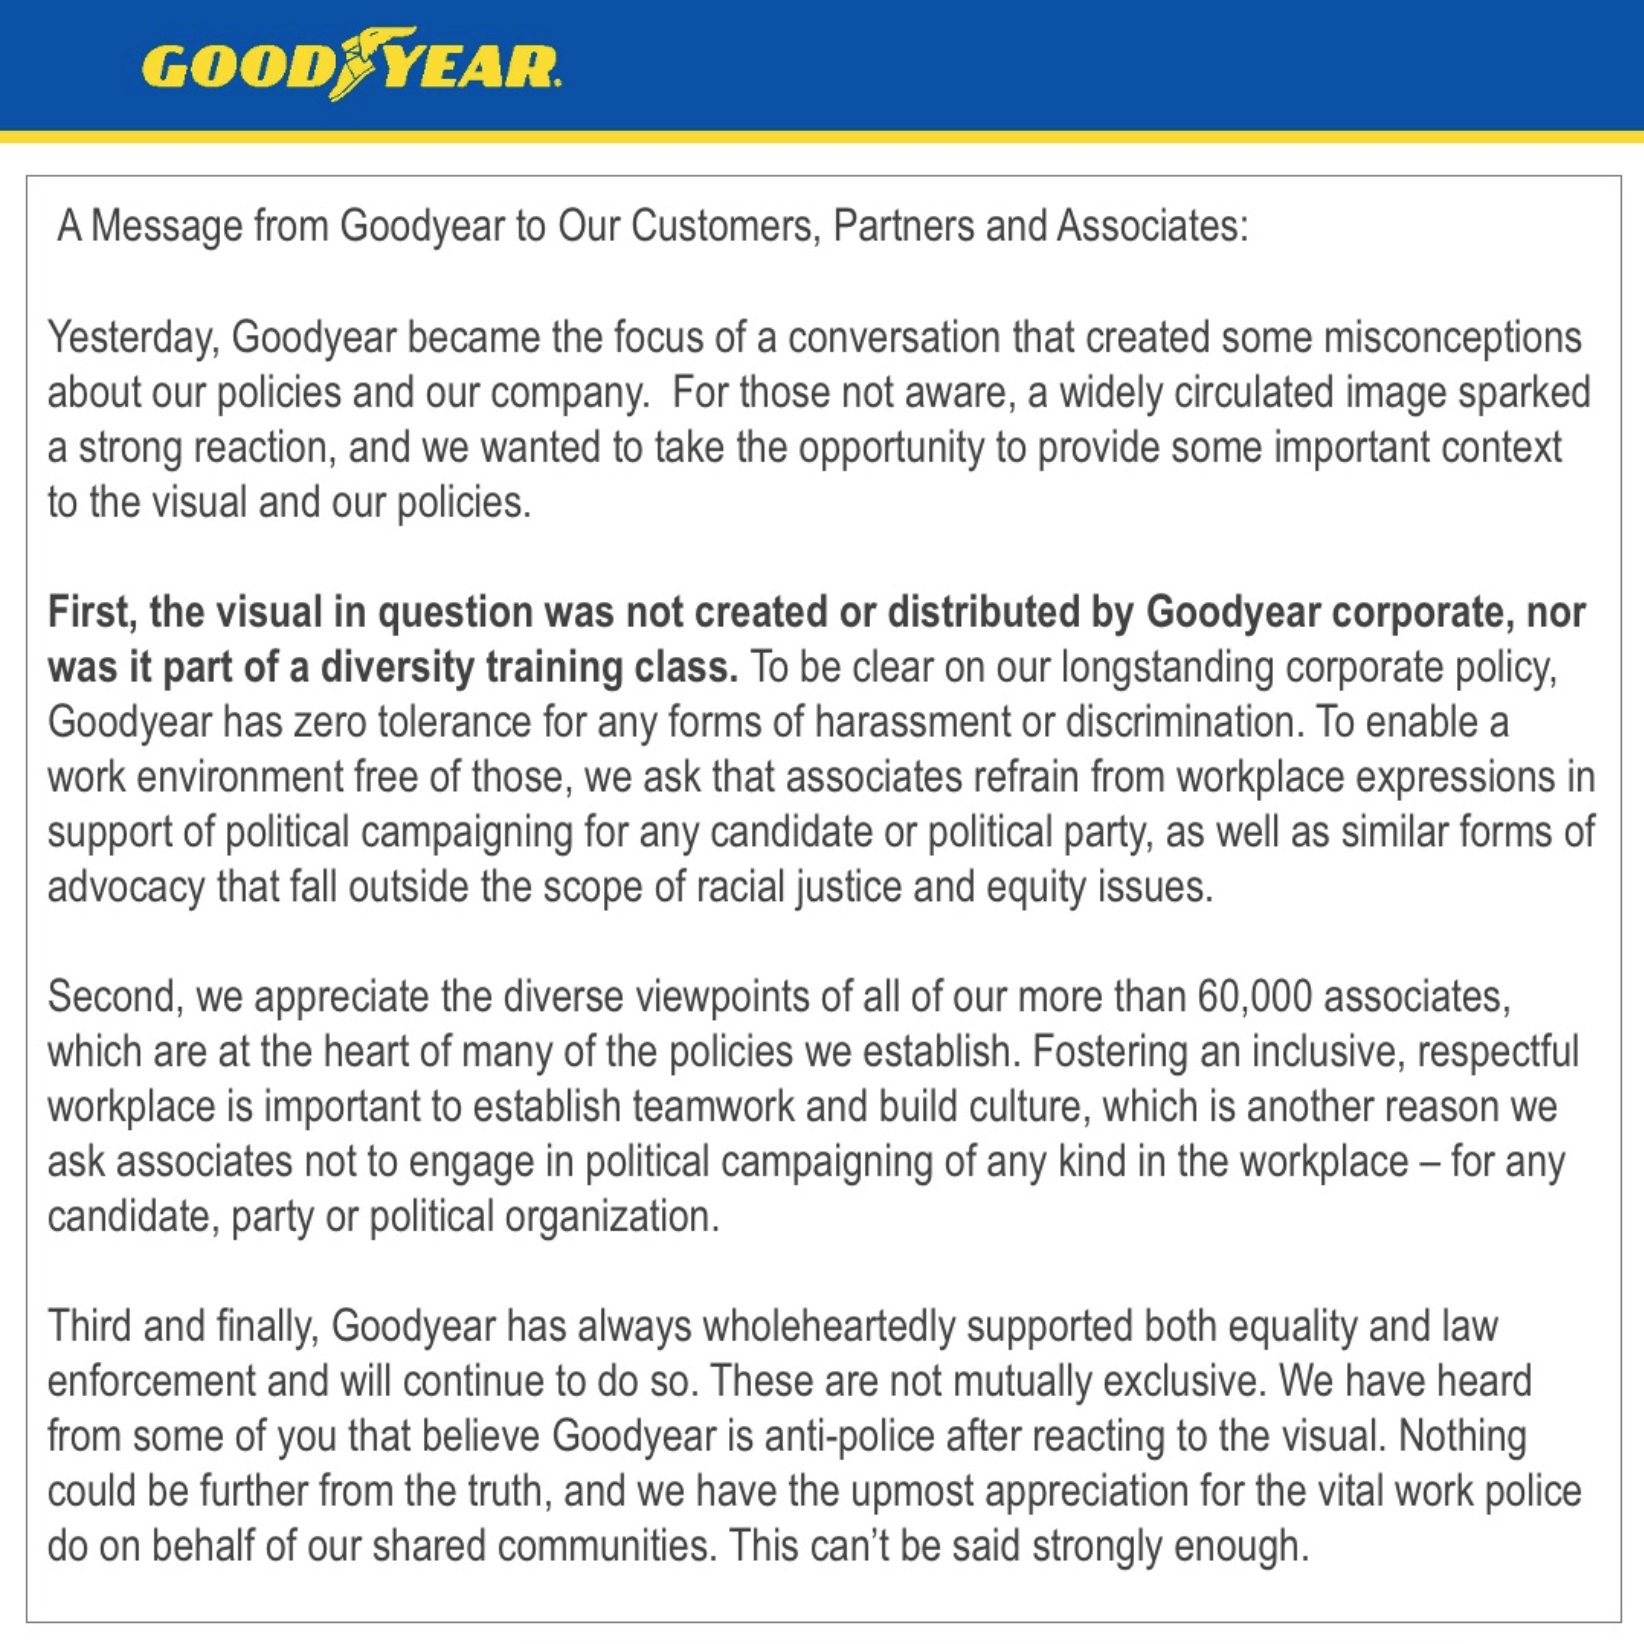 document - Good Year A Message from Goodyear to Our Customers, Partners and Associates Yesterday, Goodyear became the focus of a conversation that created some misconceptions about our policies and our company. For those not aware, a widely circulated ima